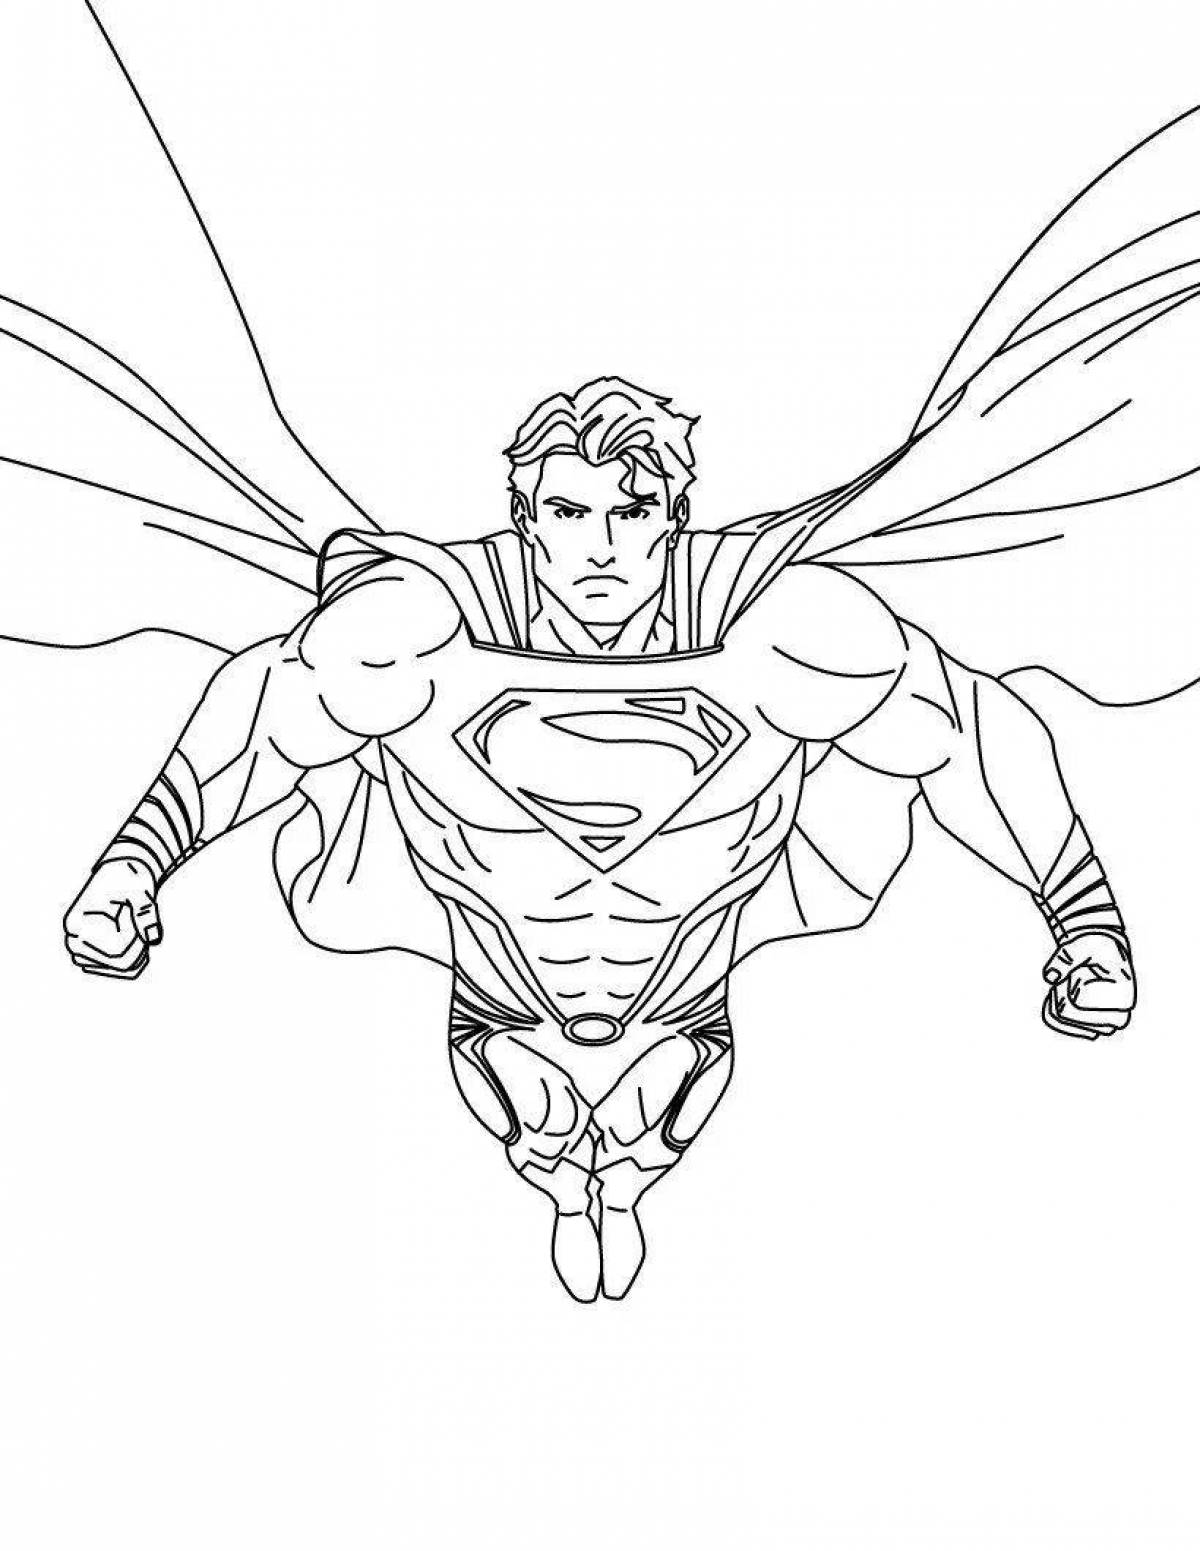 Glorious superman and spiderman coloring book